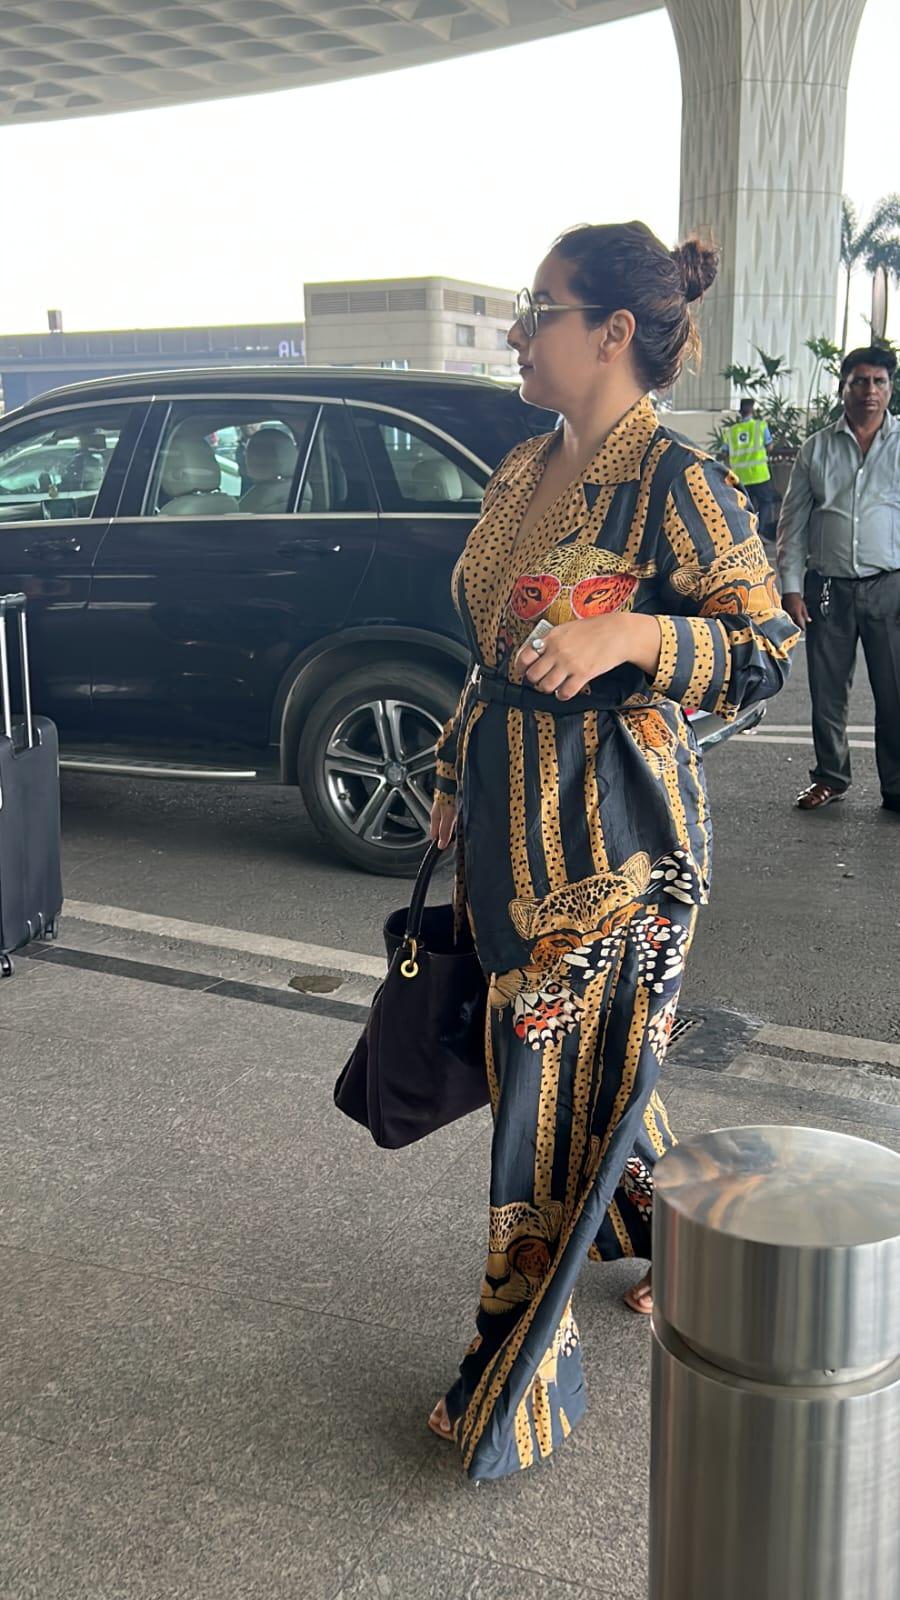 Vidya Balan looked stunning in a printed jumpsuit as she was clicked at the airport